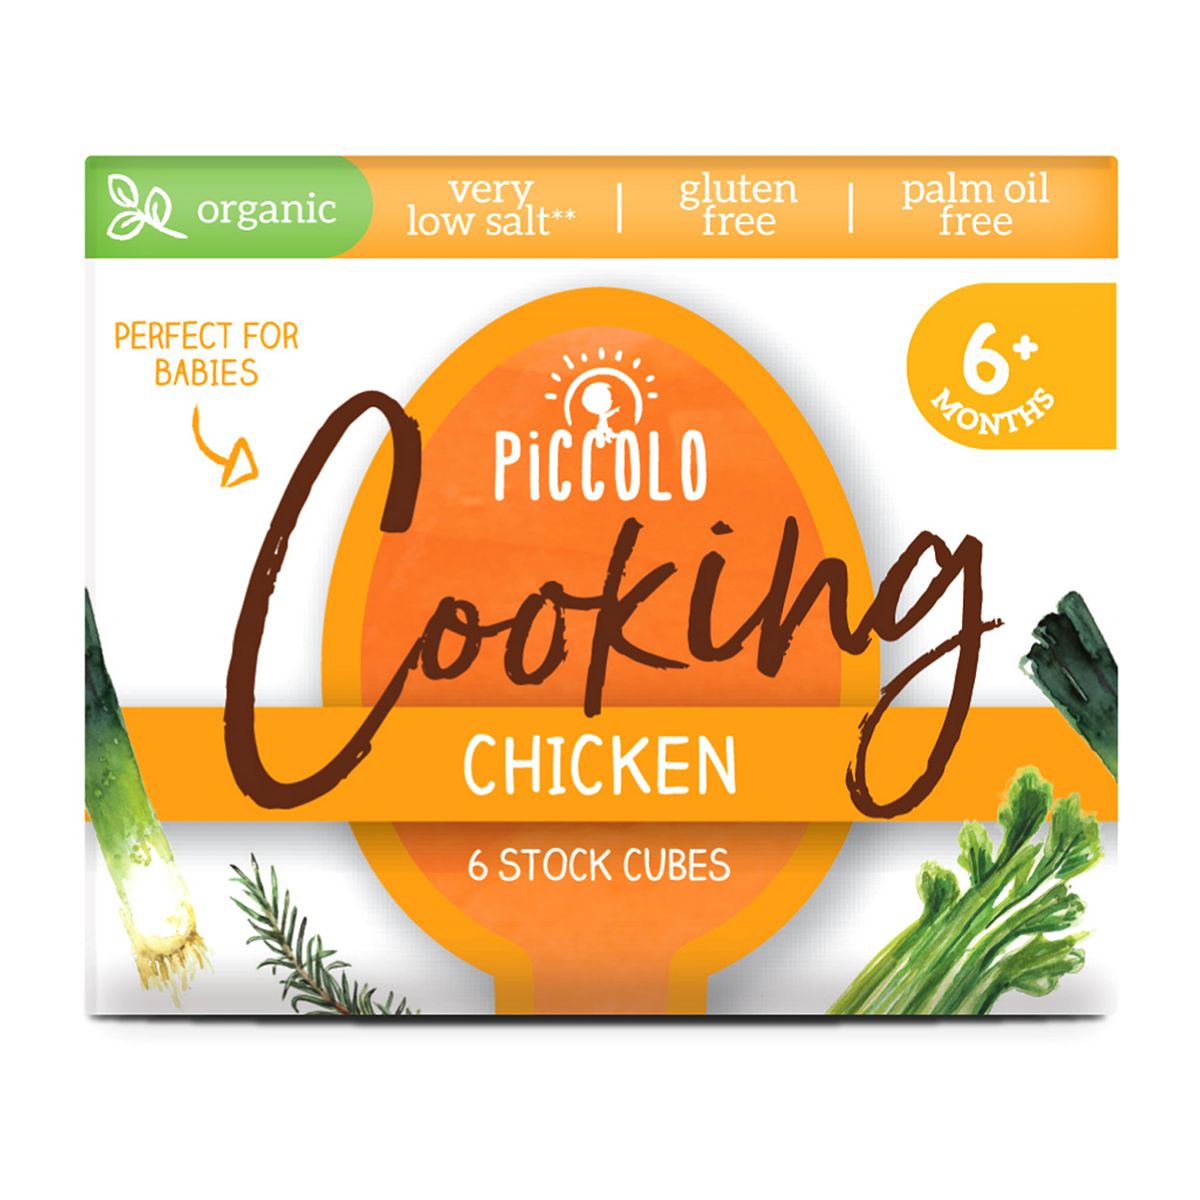 Piccolo Organic Cooking Stock Cubes?Chicken 6x8g 6 Months+